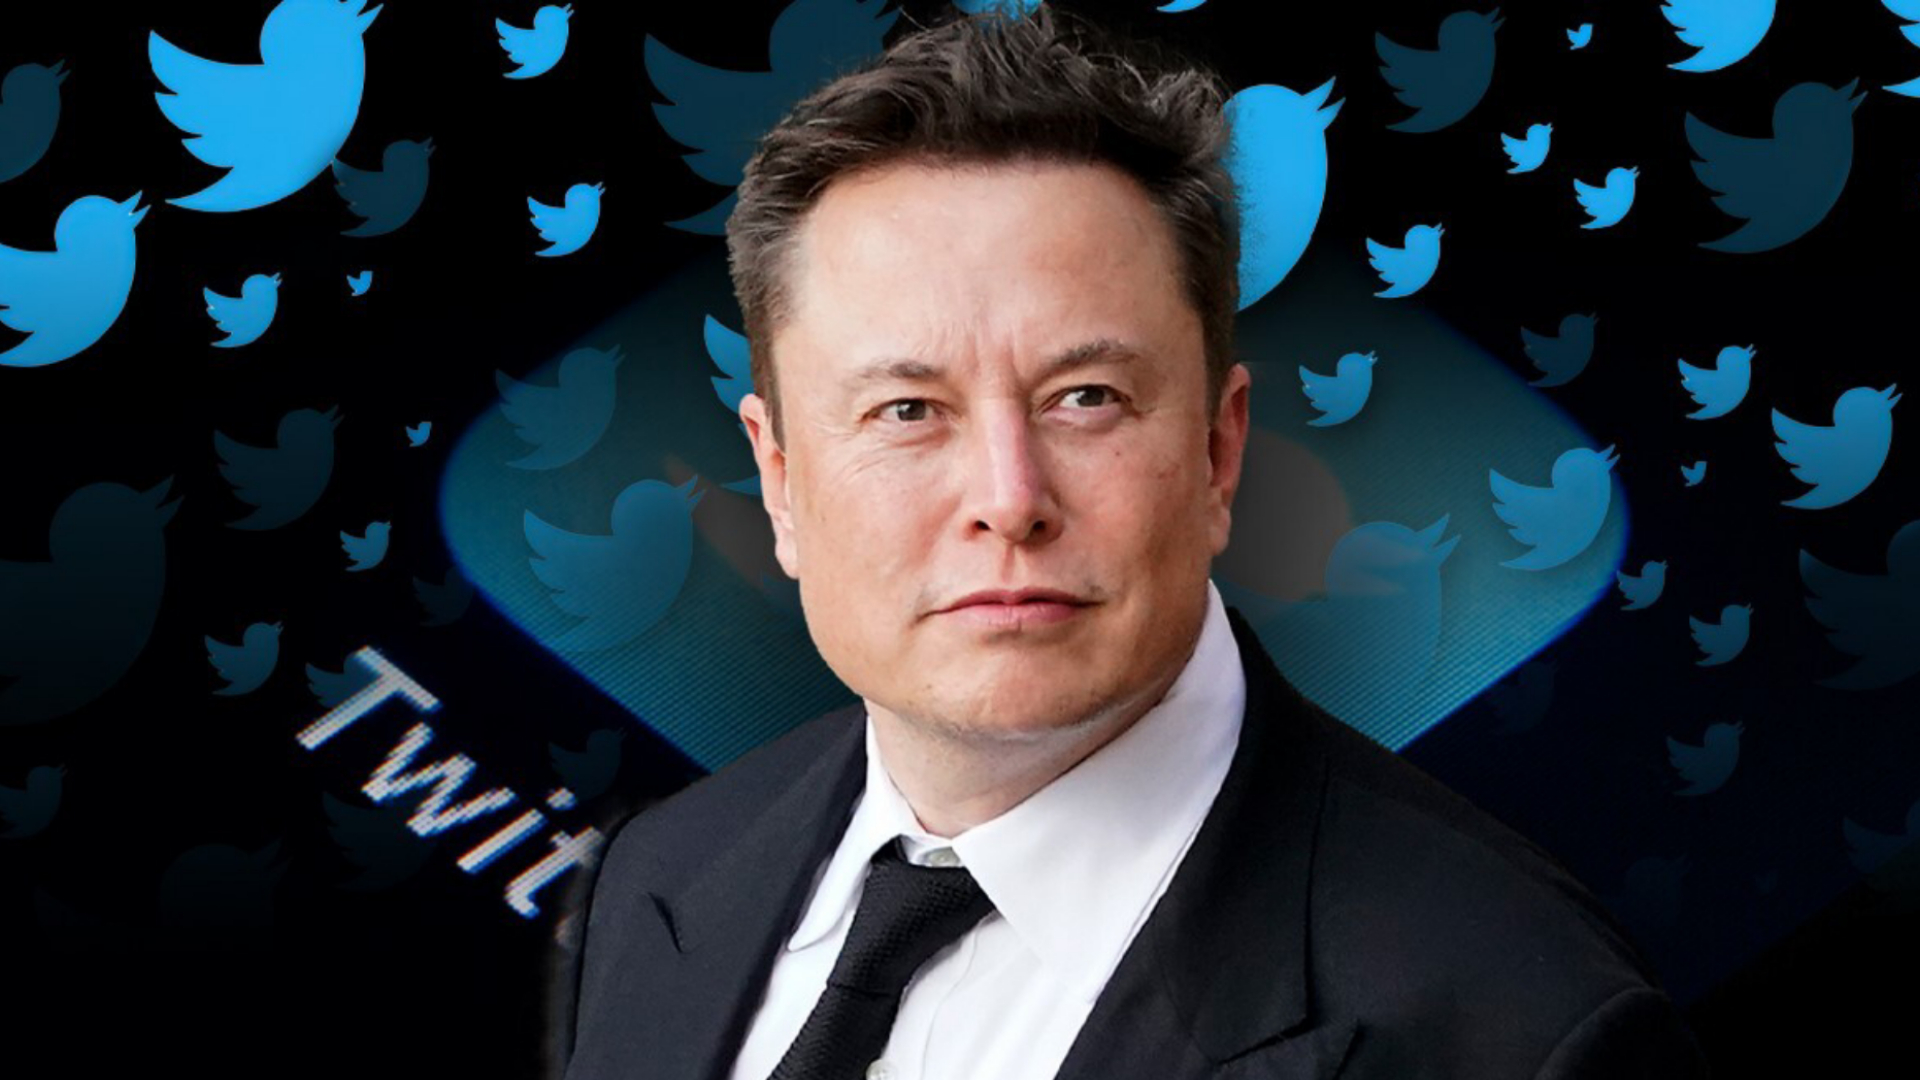 Musk Complains of ‘Too Much Work’ After Taking Over Twitter.